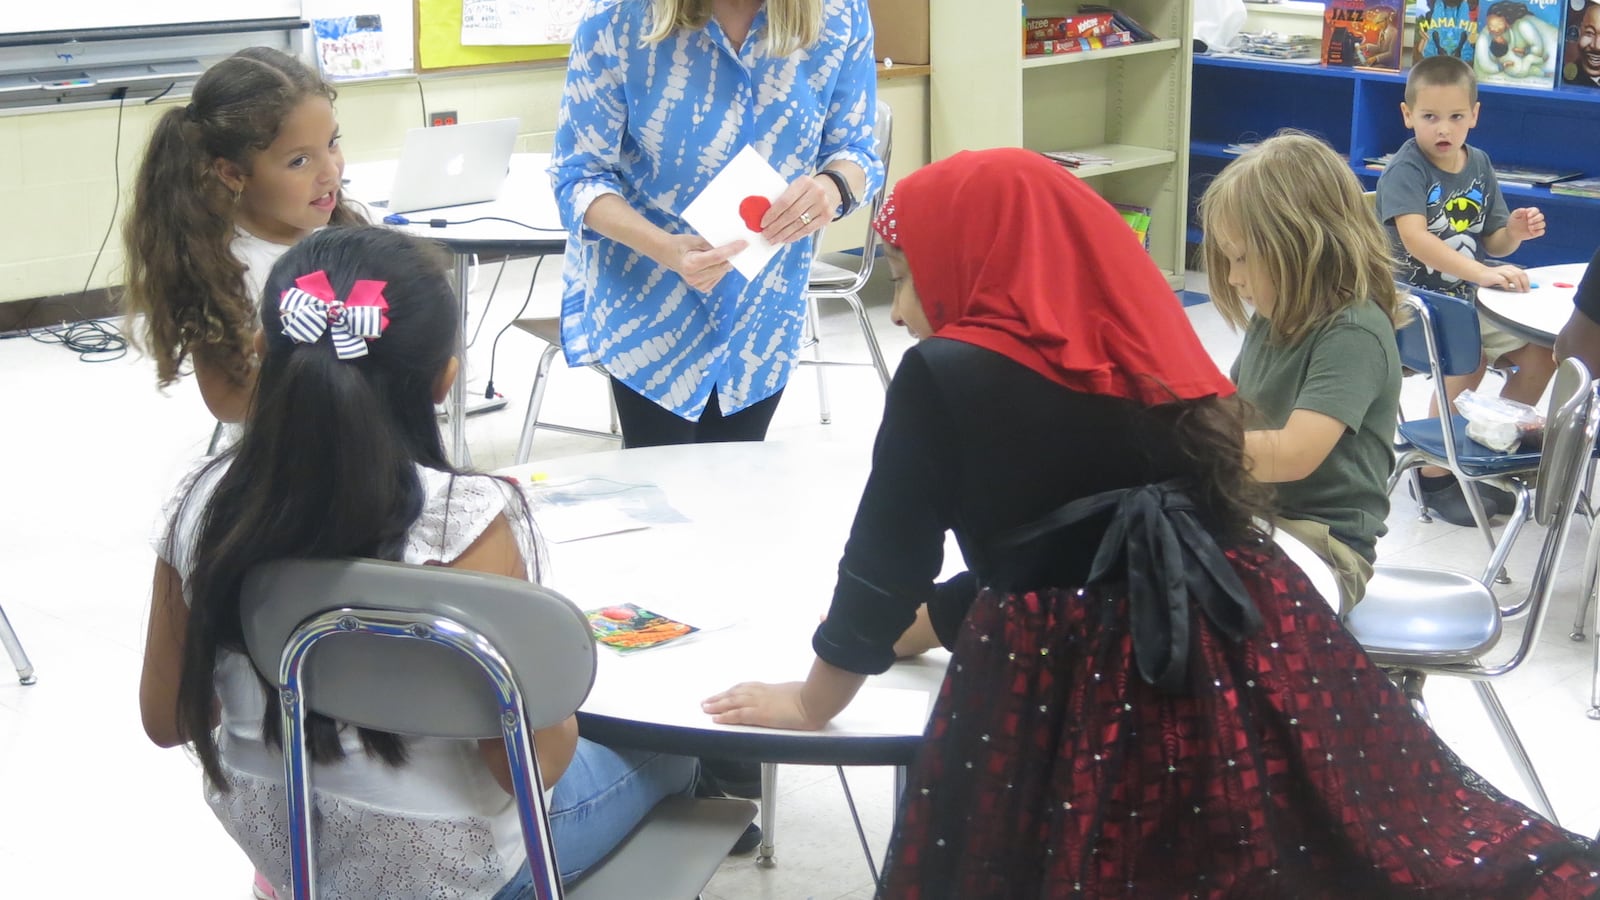 Author and illustrator Susan Eaddy leads students in a hands-on activity at Camp Explore, a literacy-based summer learning experience at J.E. Moss Elementary School in Nashville.